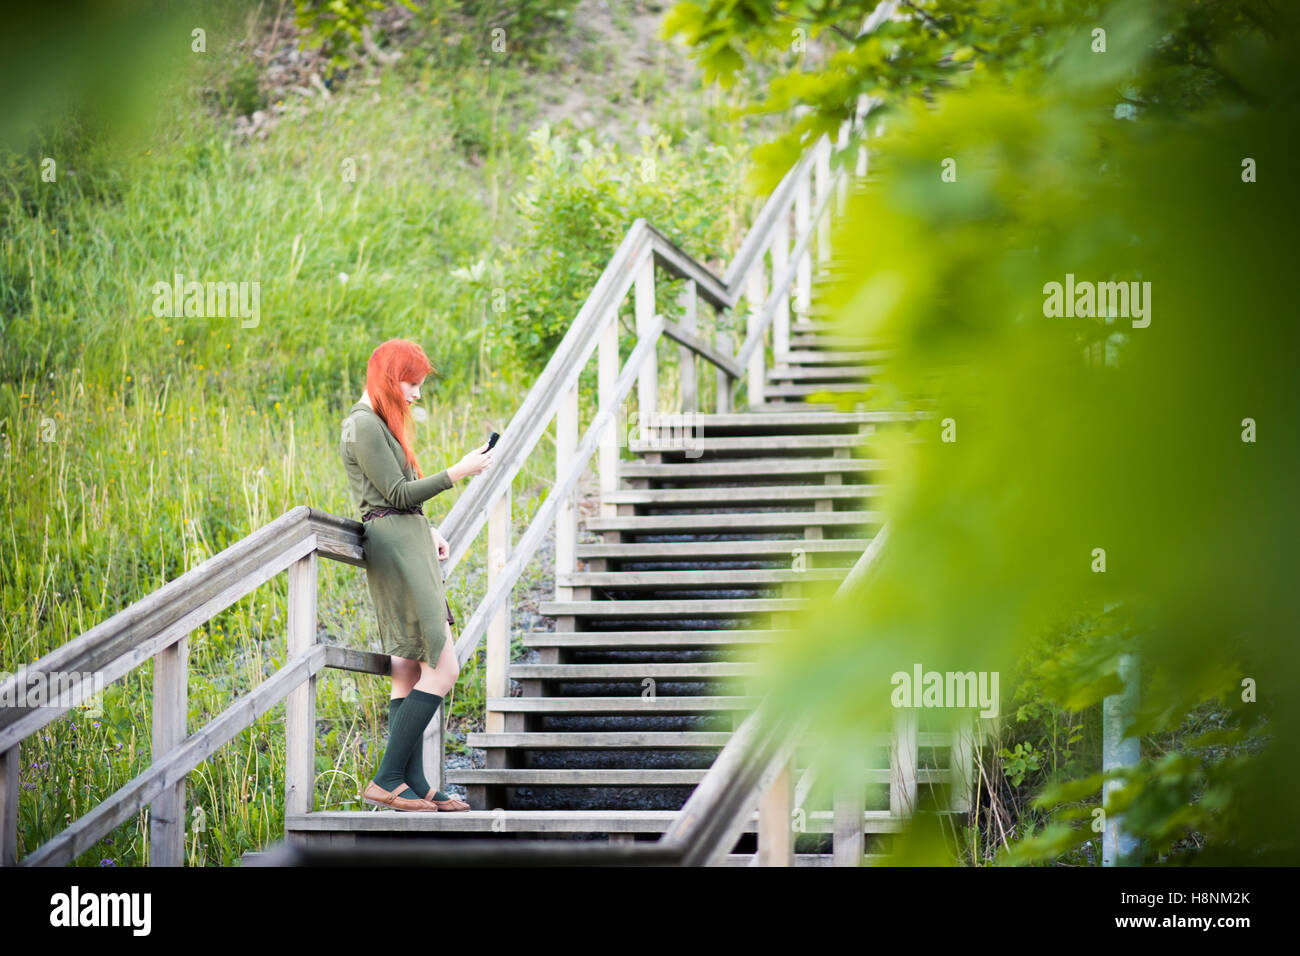 Redhaired woman standing on staircase Stock Photo